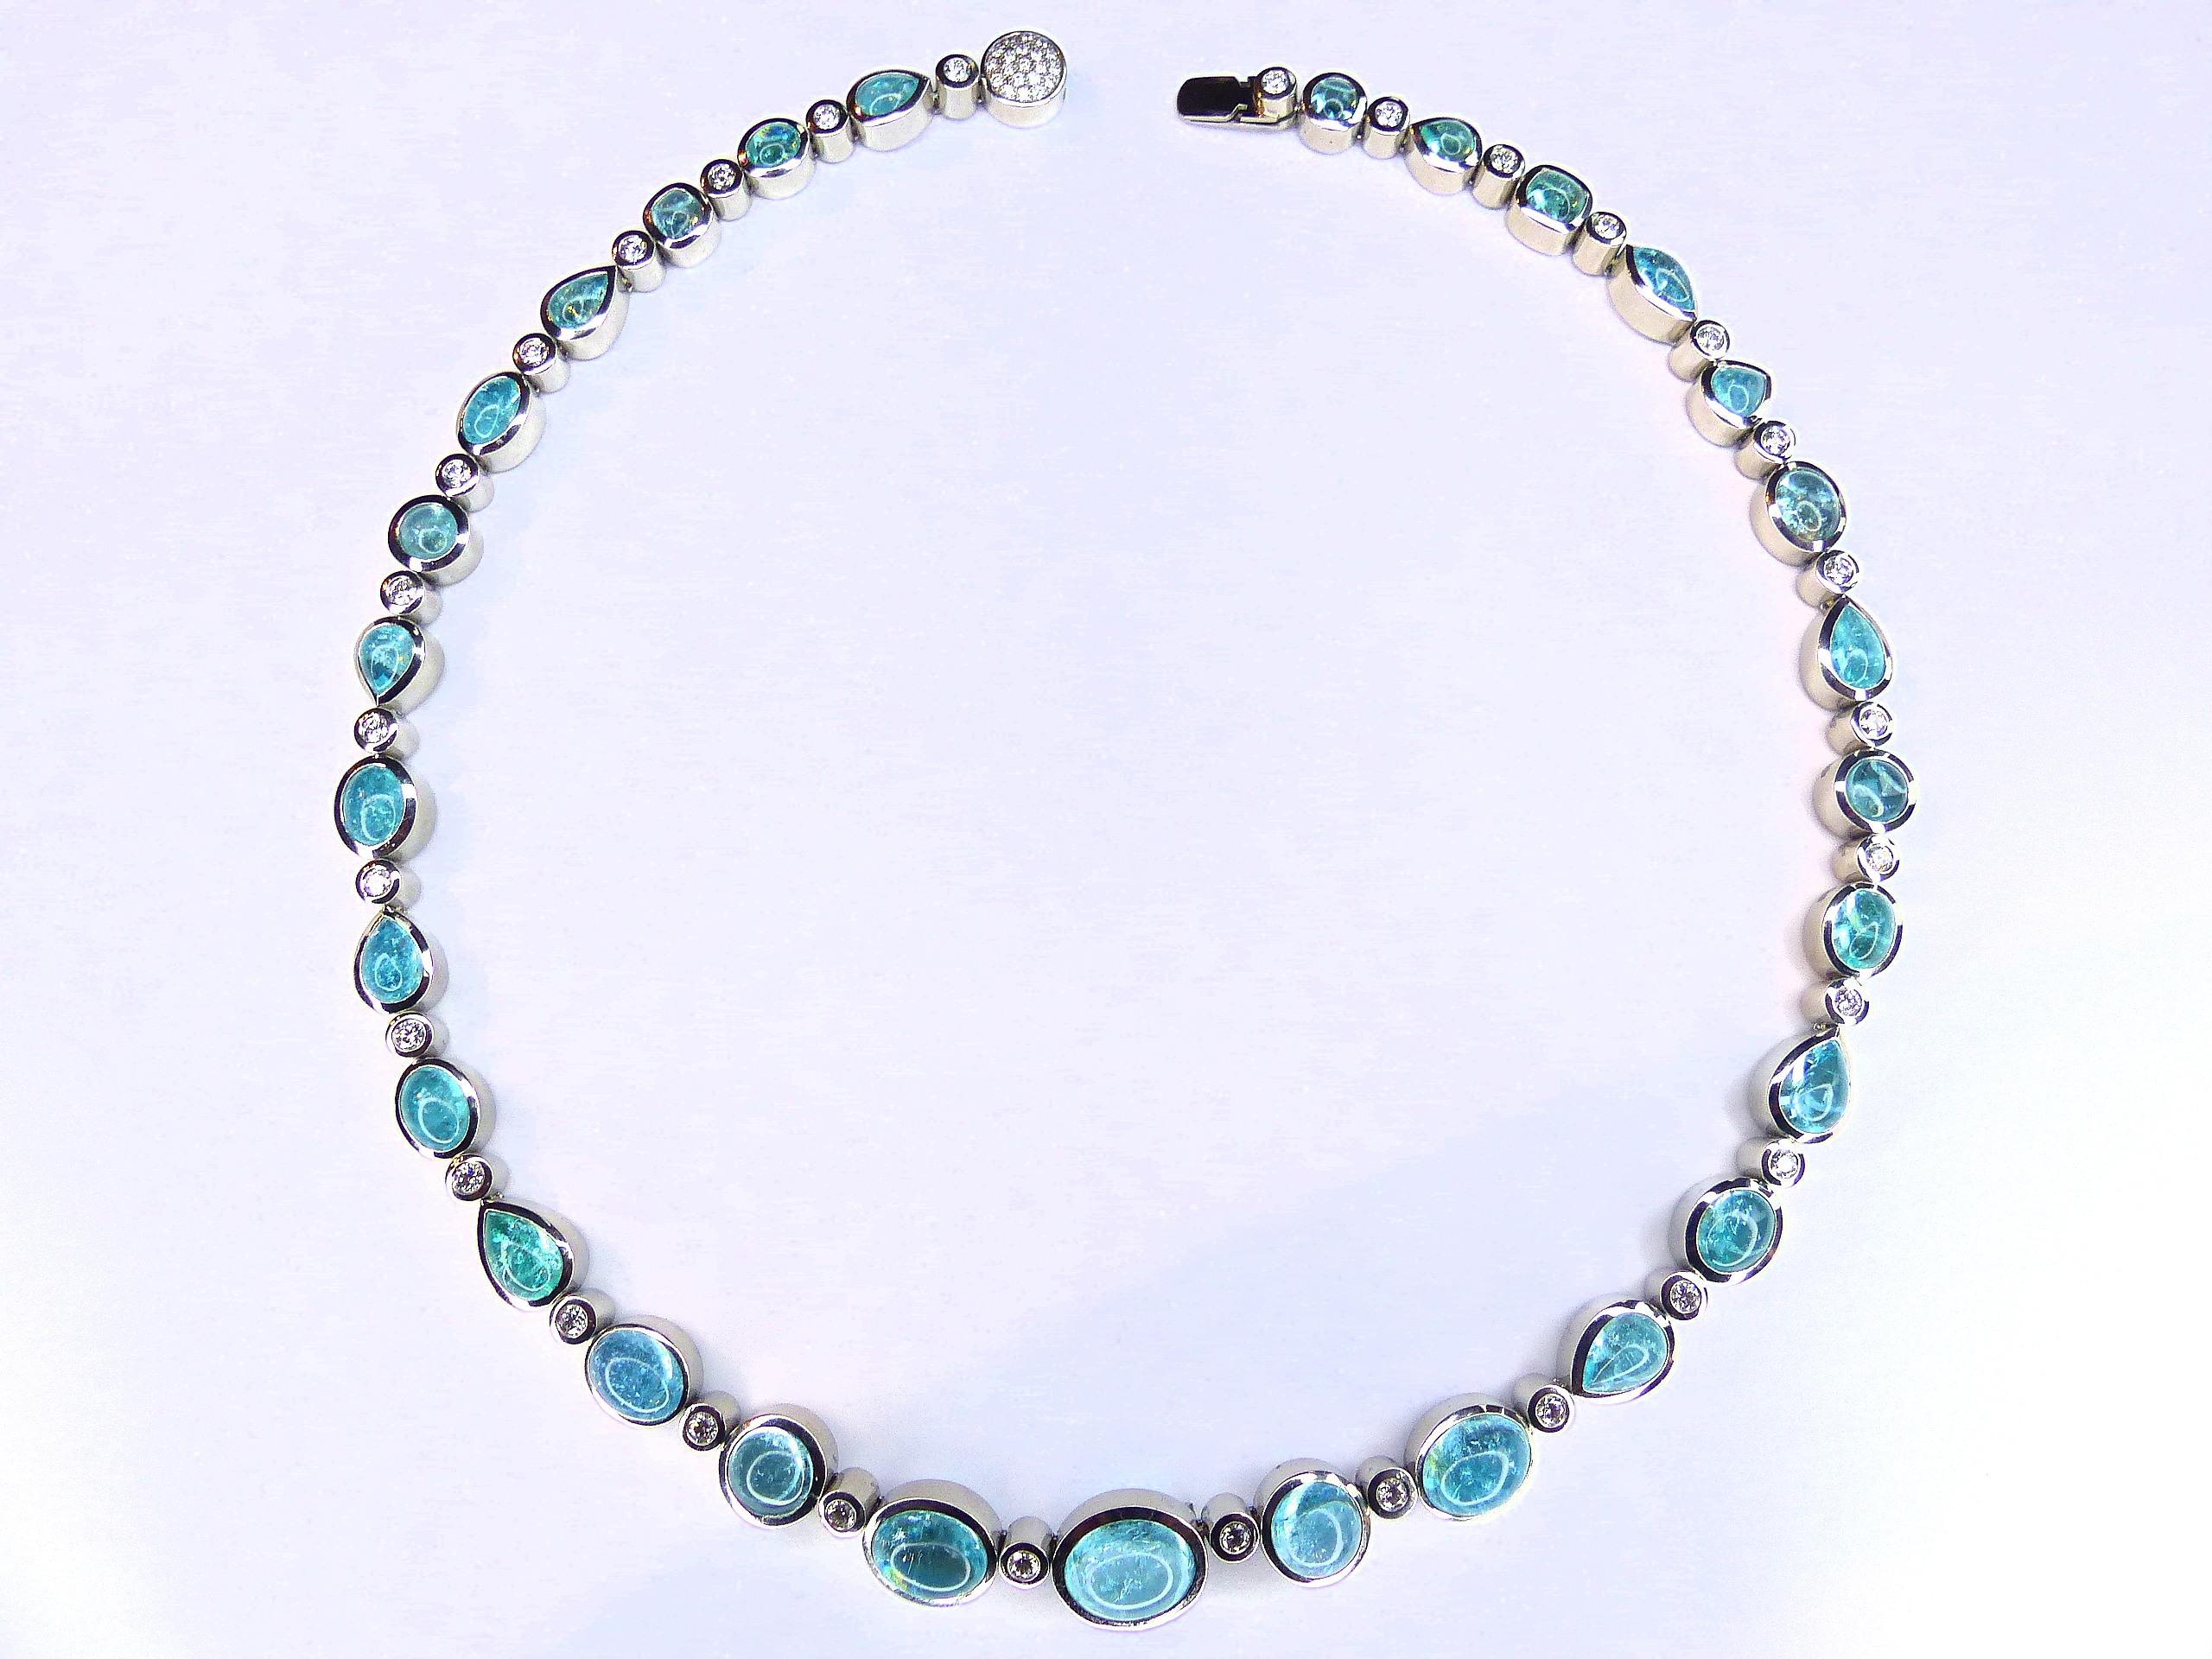 Contemporary Necklace in Platinum with 29 Paraiba Tourmaline Cabouchons and 46 Diamonds